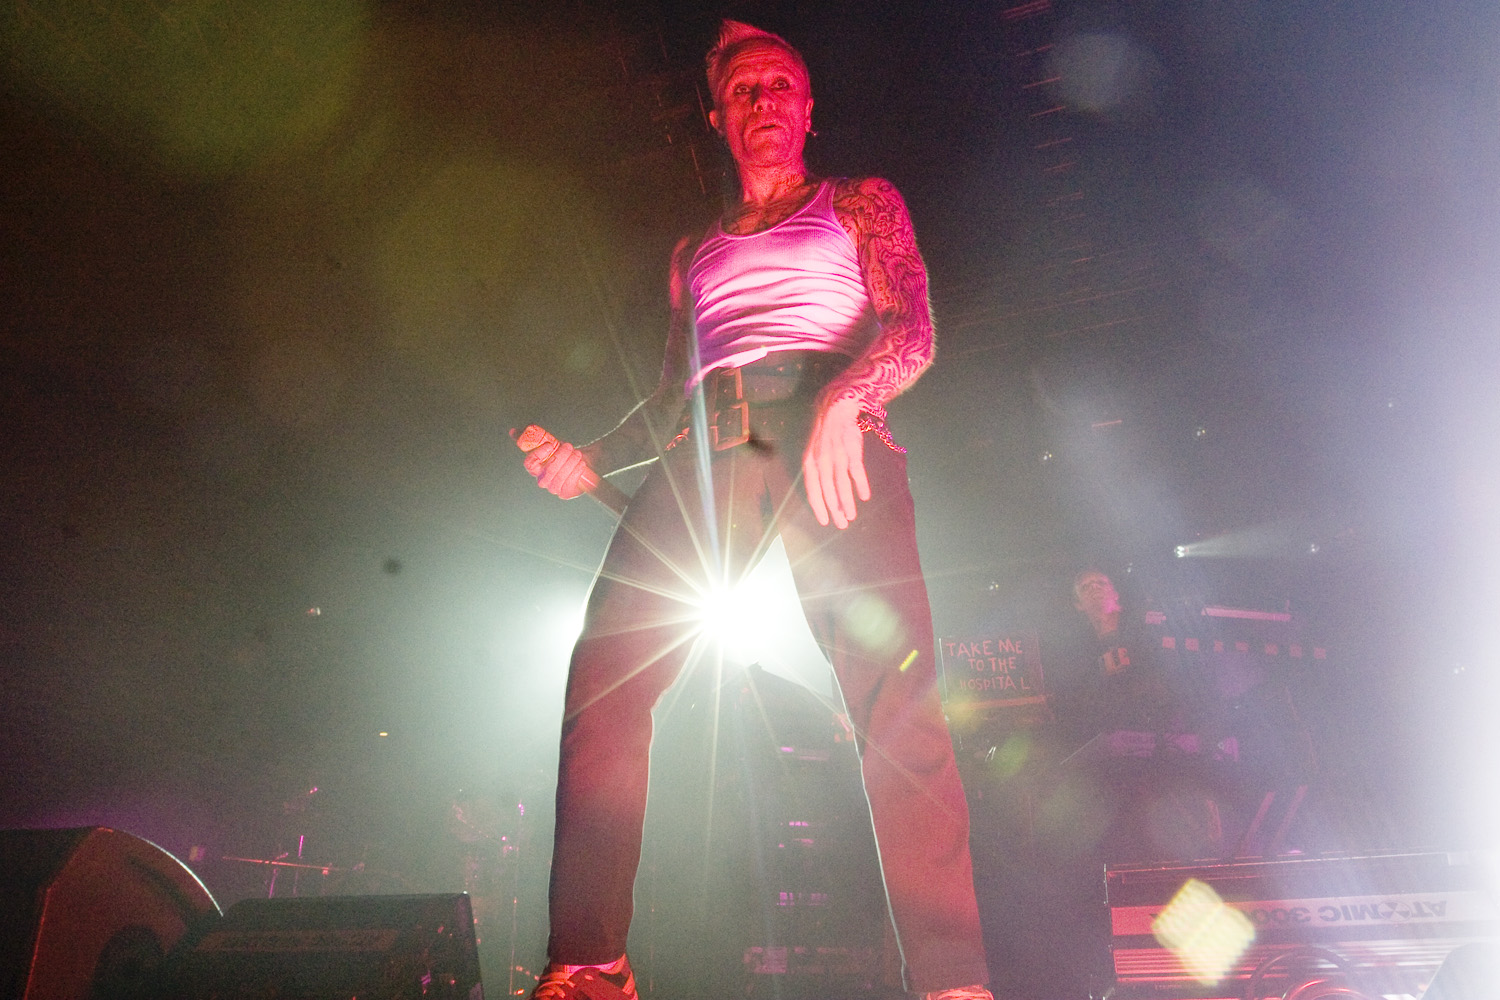 The Prodigy @ Roseland Ballroom on March 26, 2009